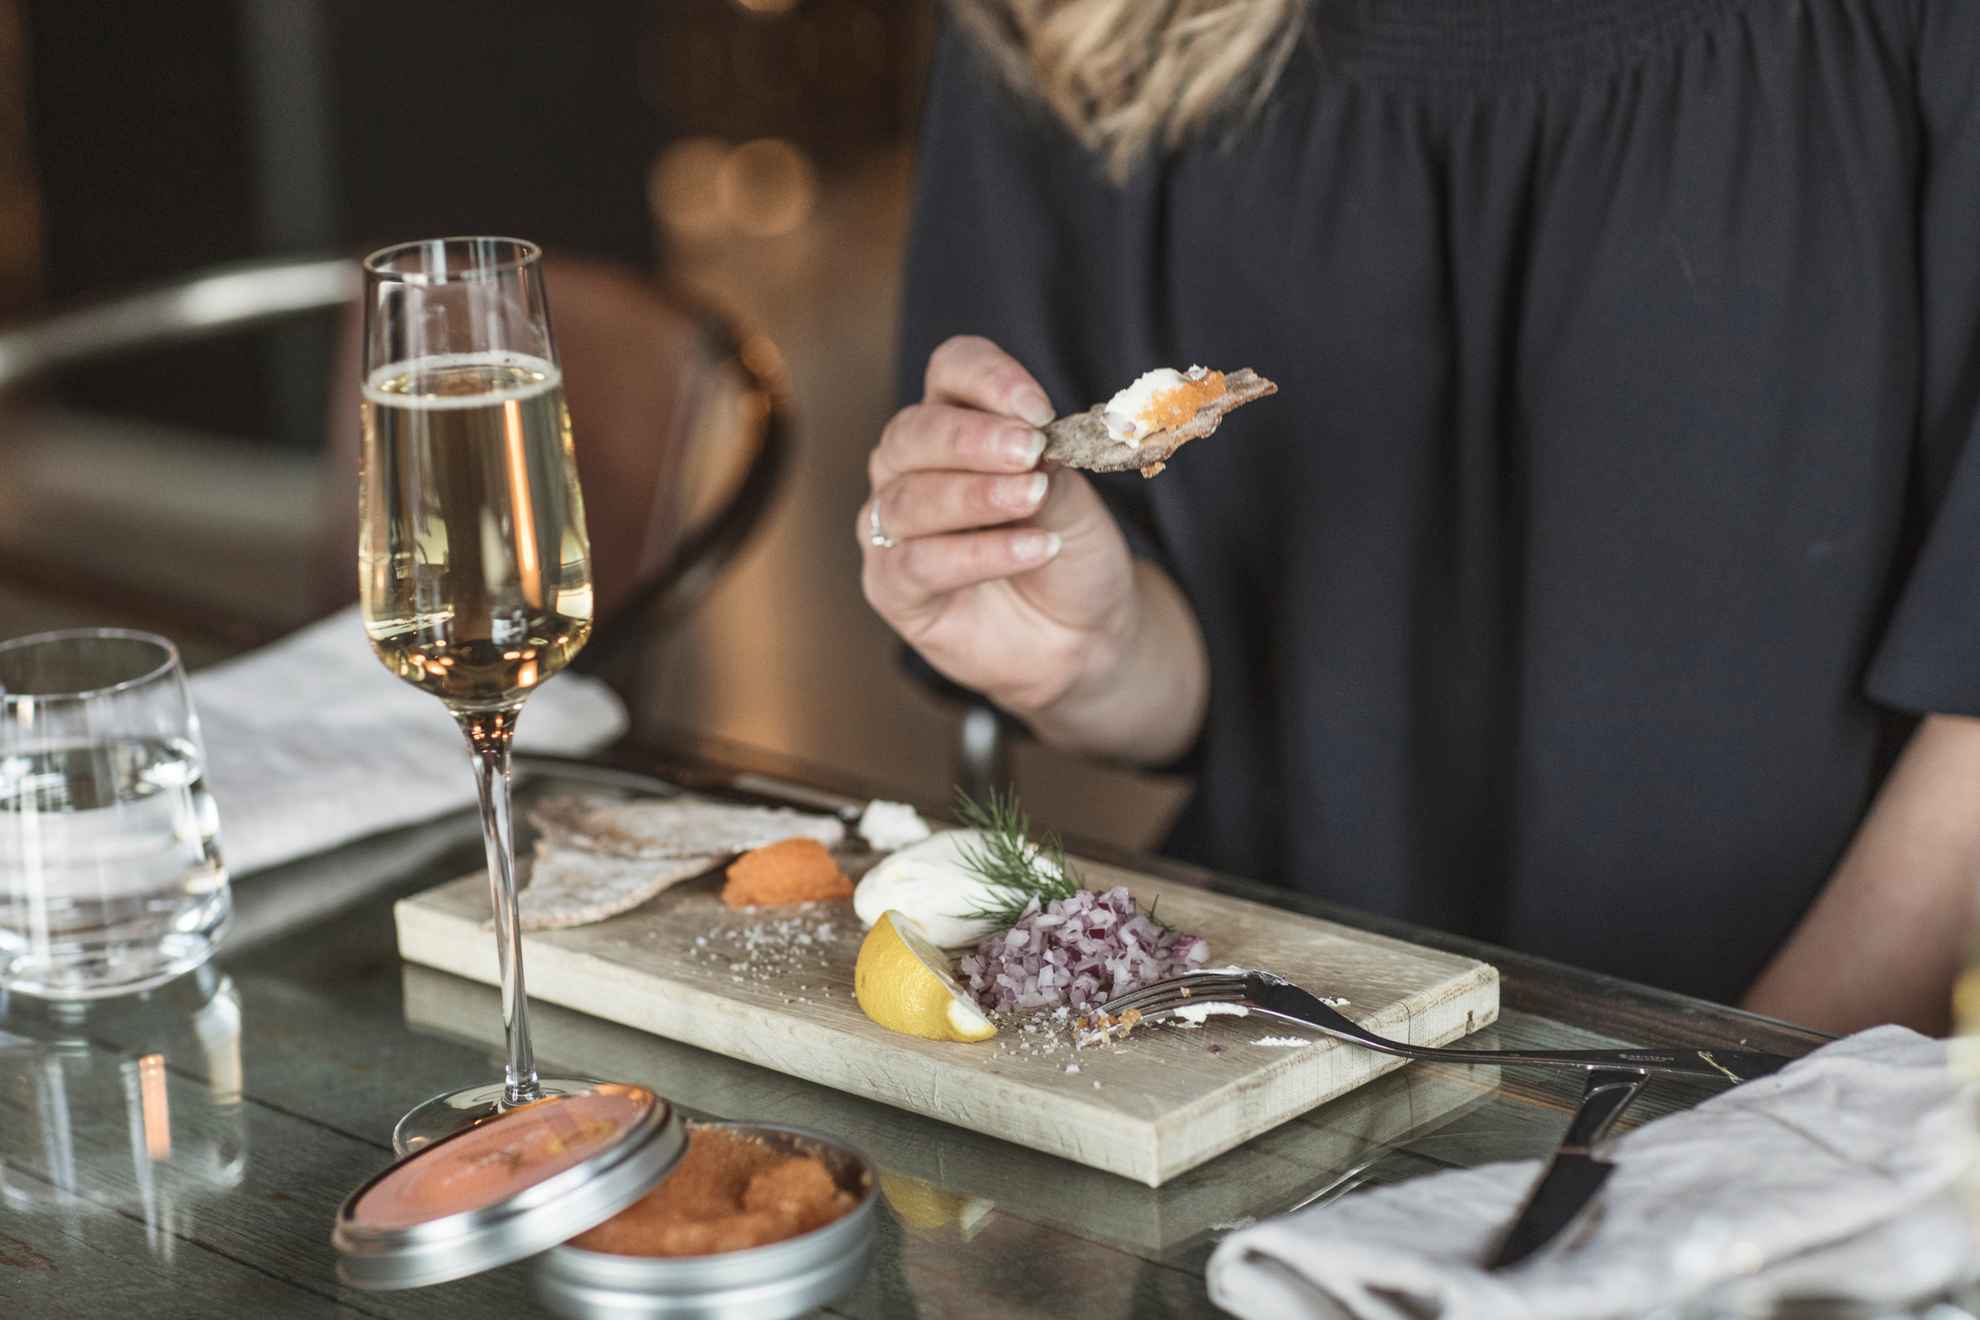 Close-up of a woman eating caviar, red onion, sour cream, lemon and crispbread from a wooden tray and drinking sparkling wine.